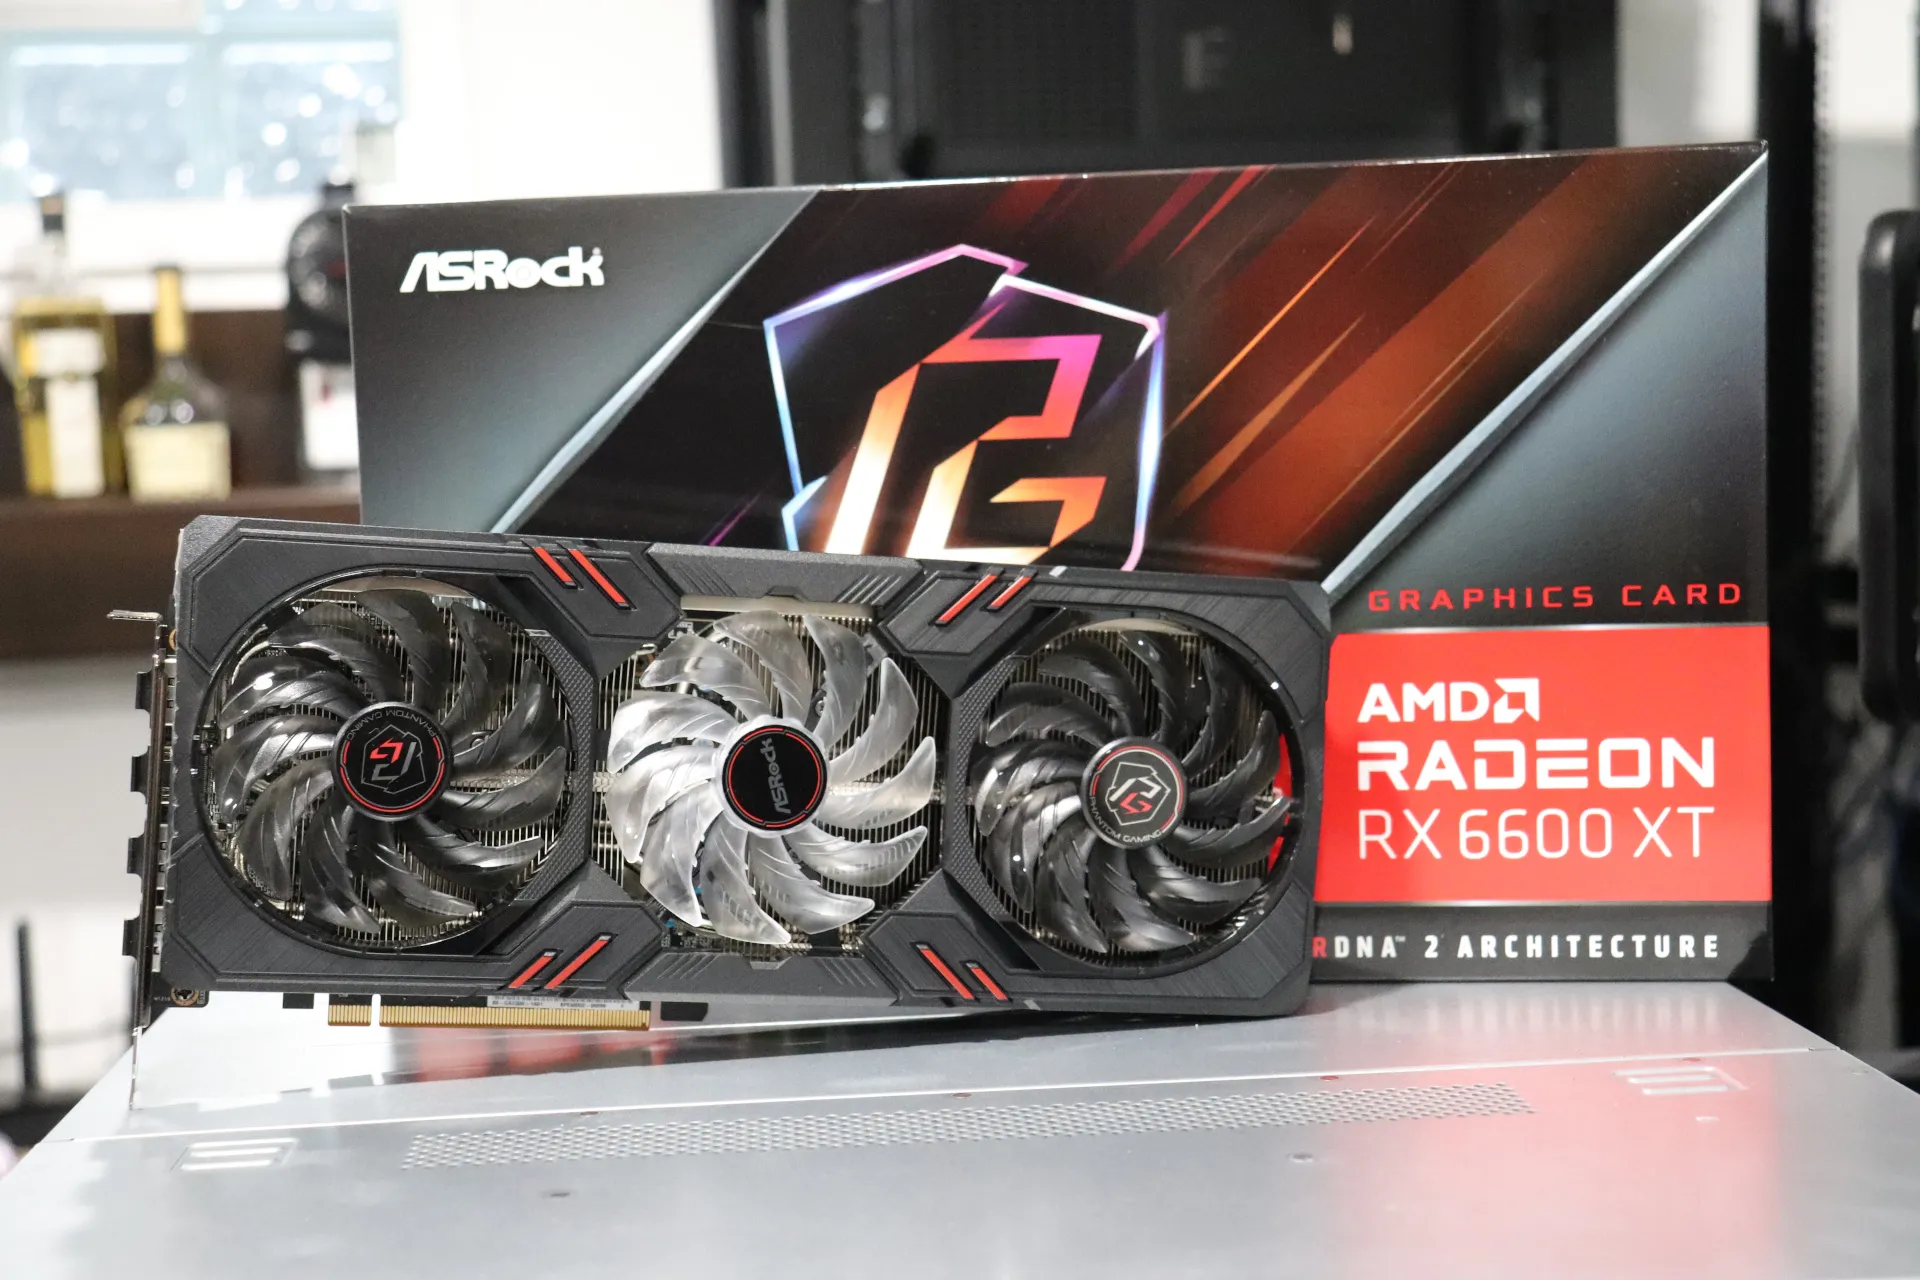 AMD Radeon RX 6600 XT Graphics Cards Launched For $379 (Approx